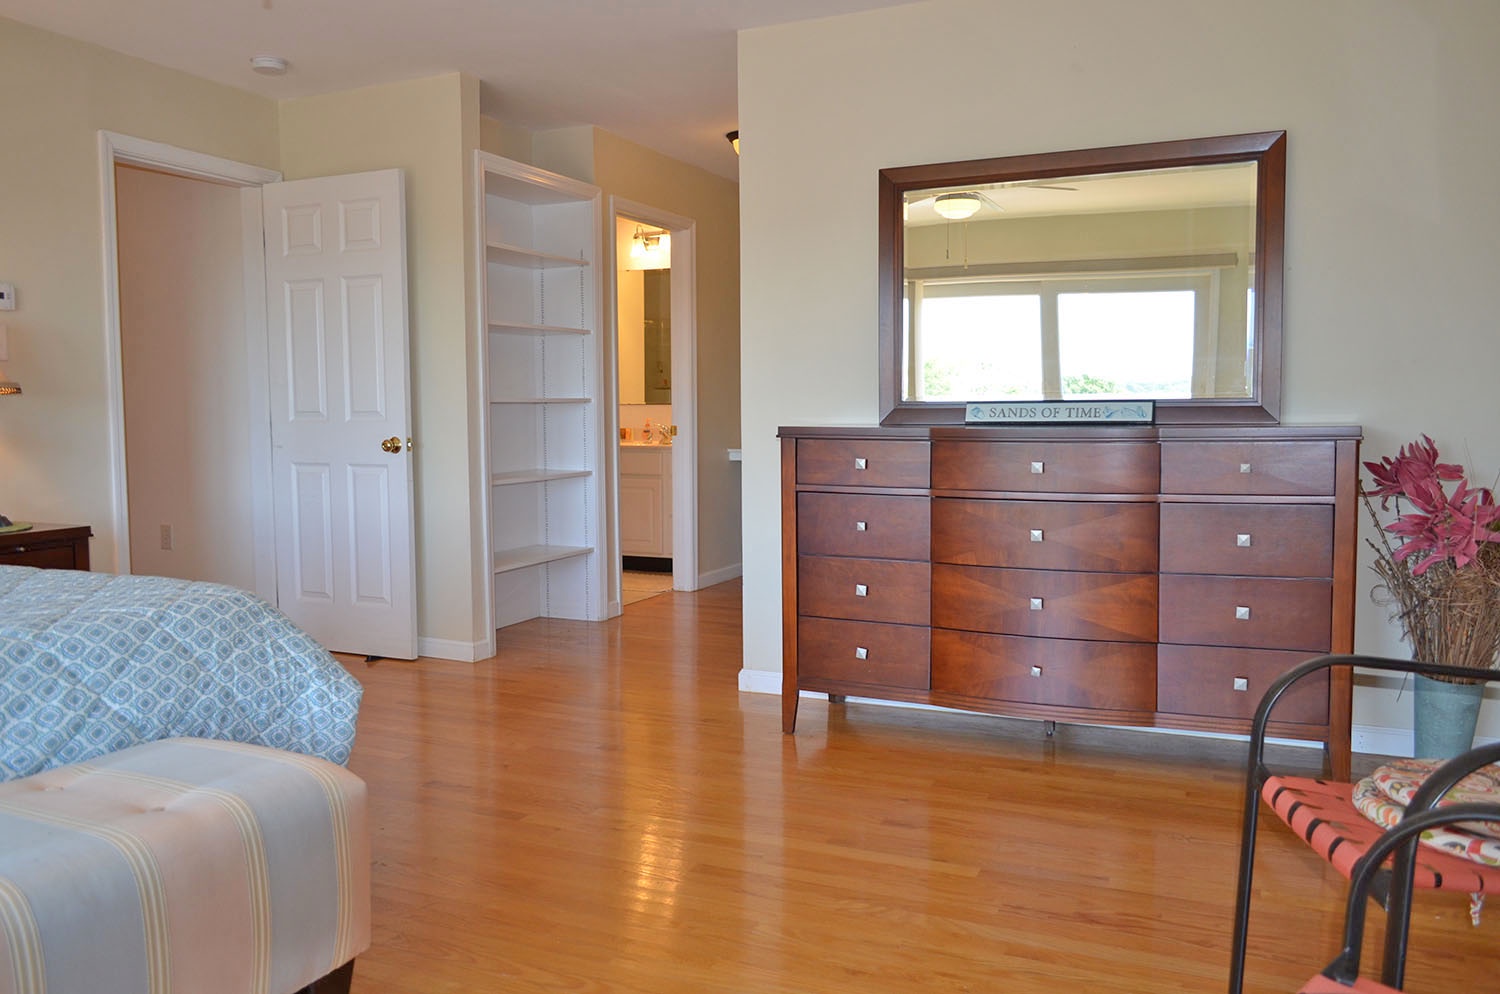 Plenty of storage in the Master suite with a vanity area off the bath.